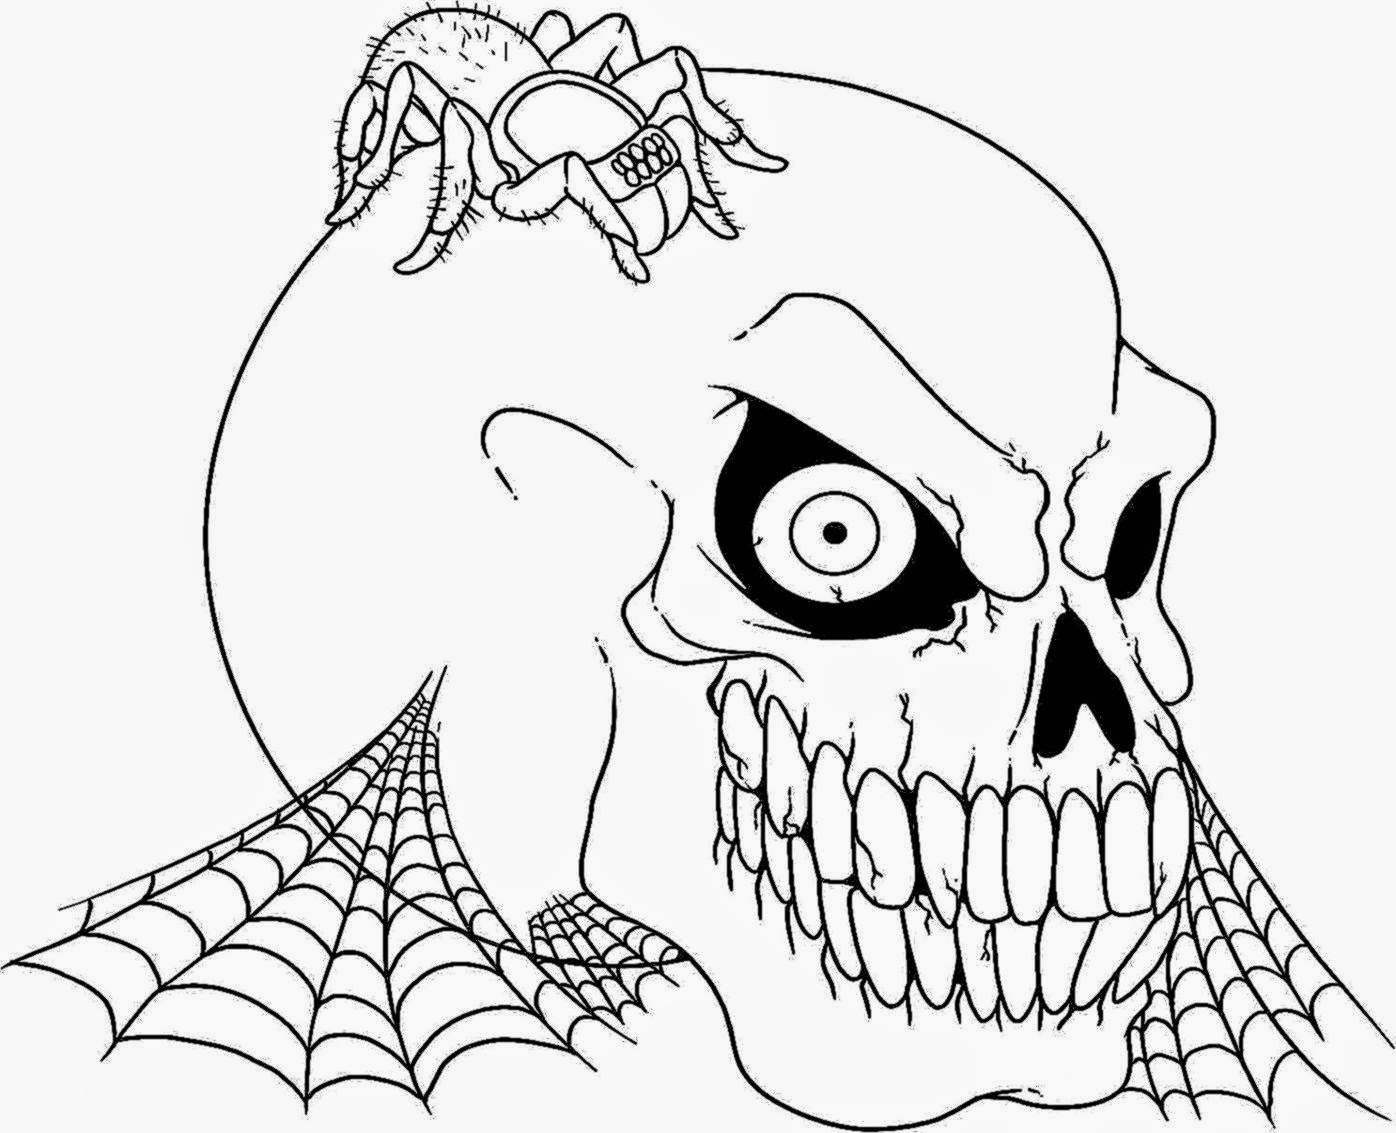 Download Lego Grim Reaper Coloring Pages Coloring Pages